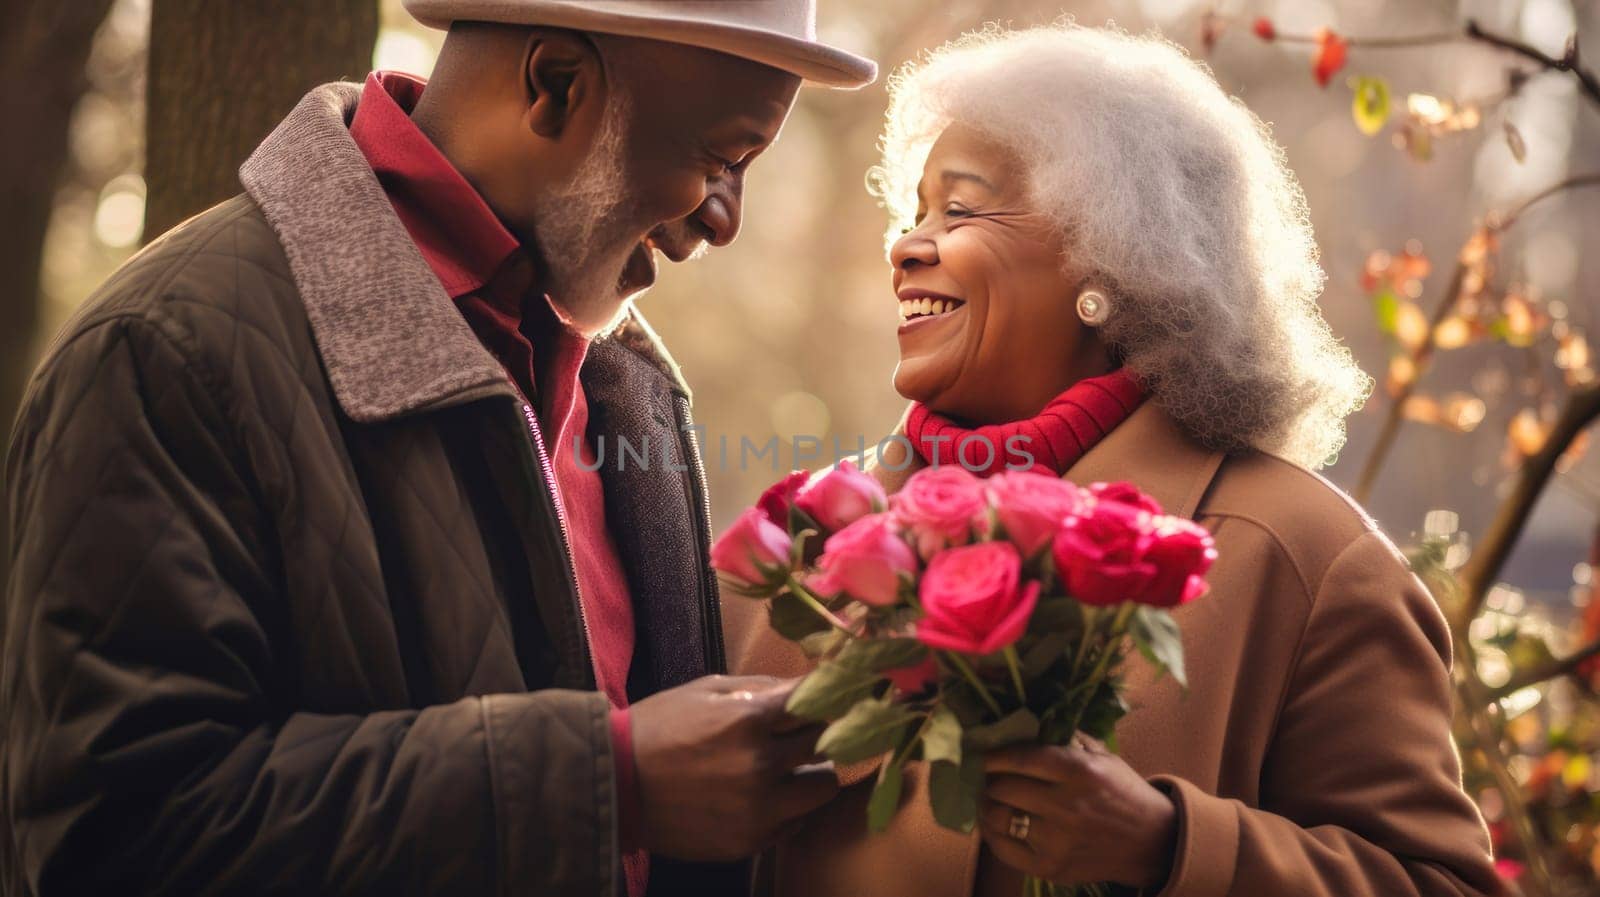 An elderly African man gives his wife a large bouquet of roses for Valentine's Day Valentine's day, newlyweds, engagement, holiday, birthday, wedding, anniversary, surprise, date.